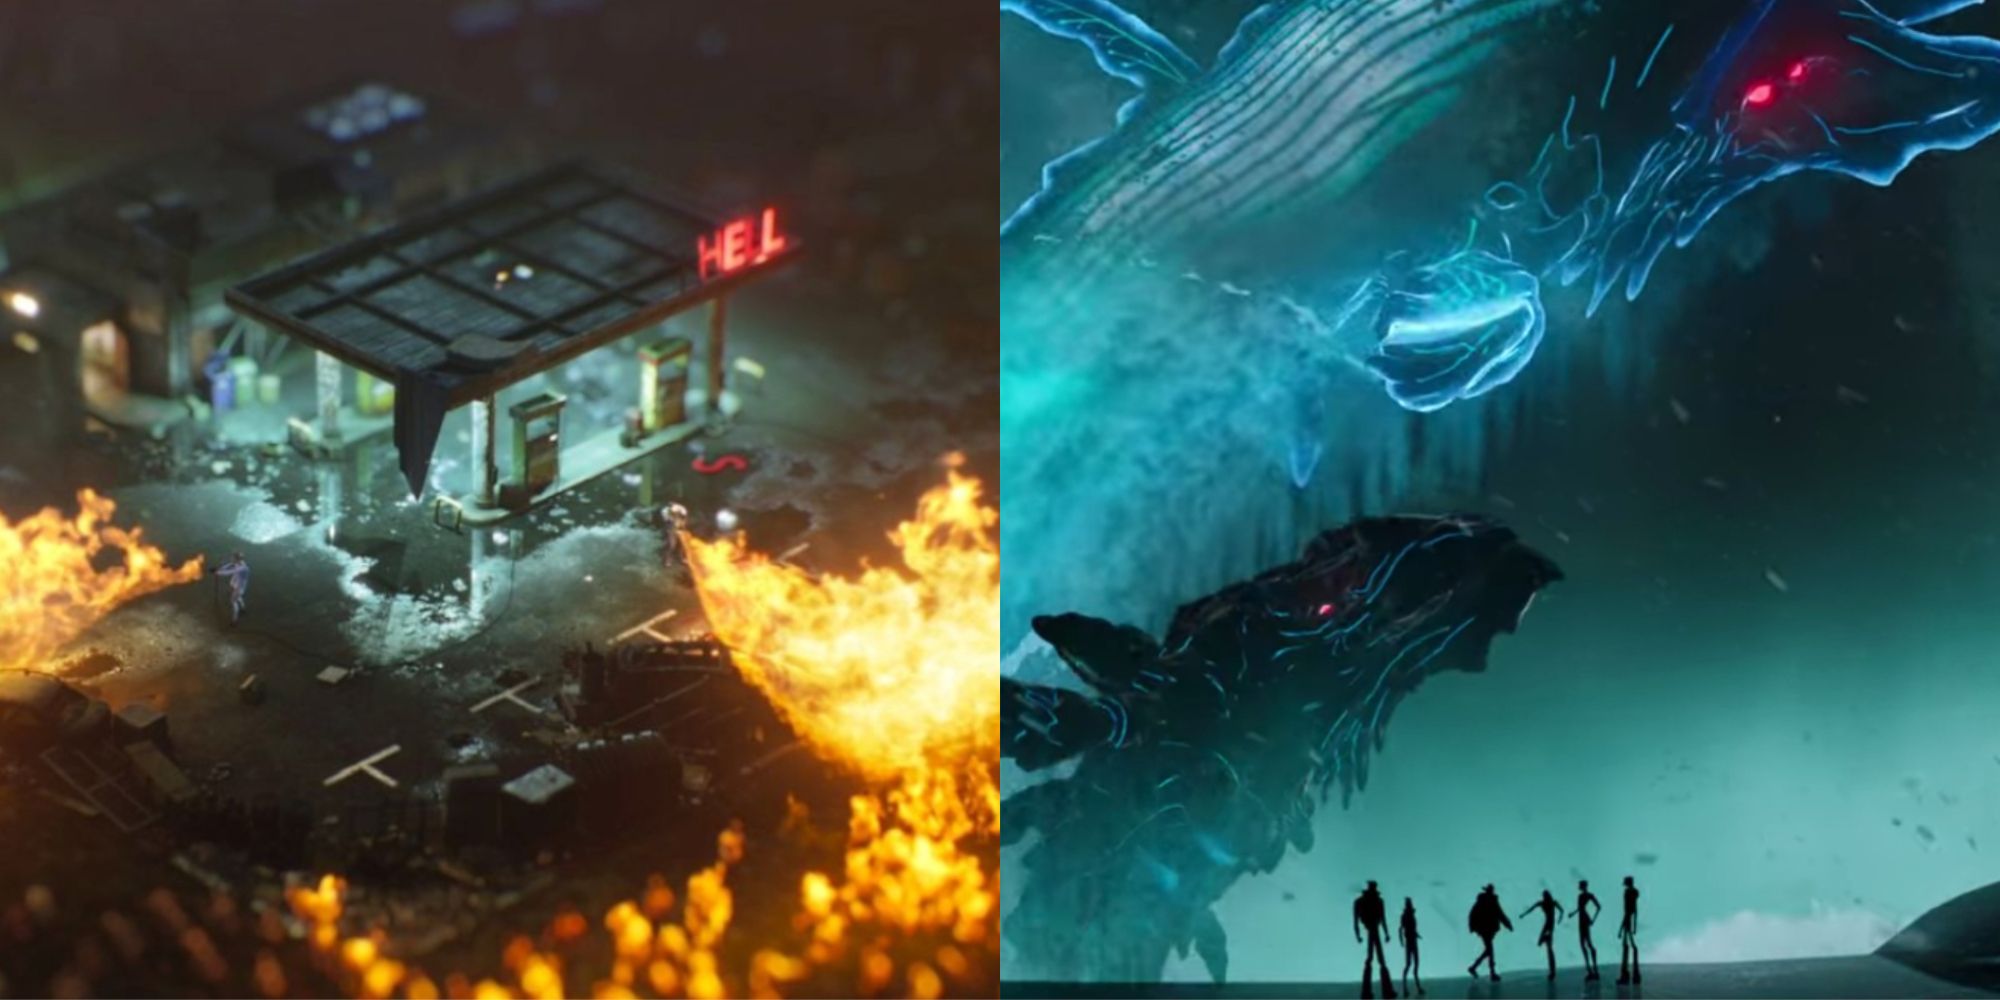 A split image of dystopian worlds from Love, Death and Robots.